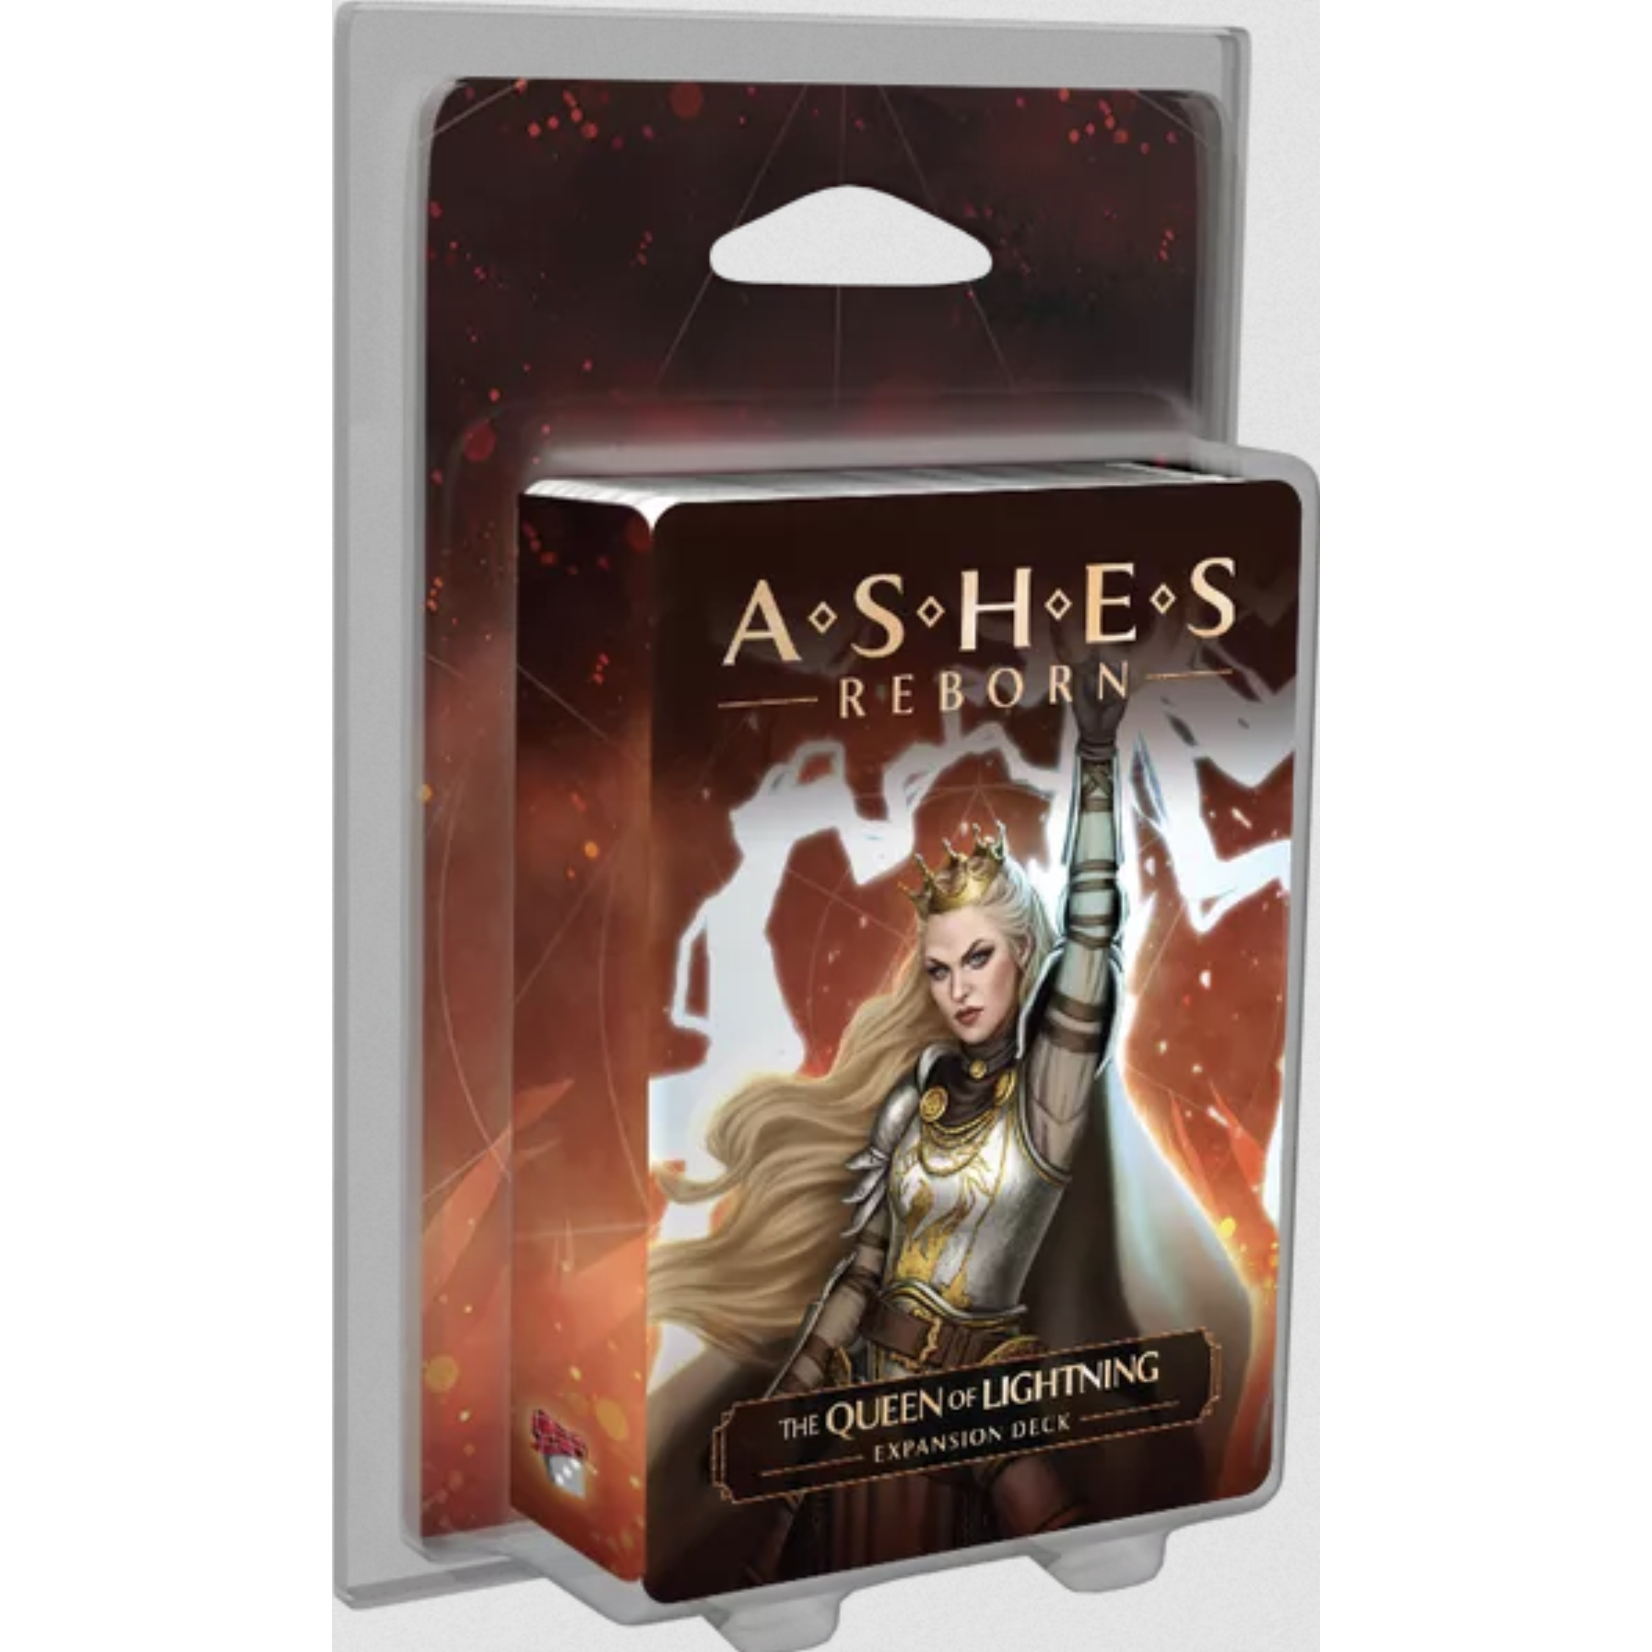 Plaid Hat Games Ashes Reborn - The Queen of Lightning Expansion Deck